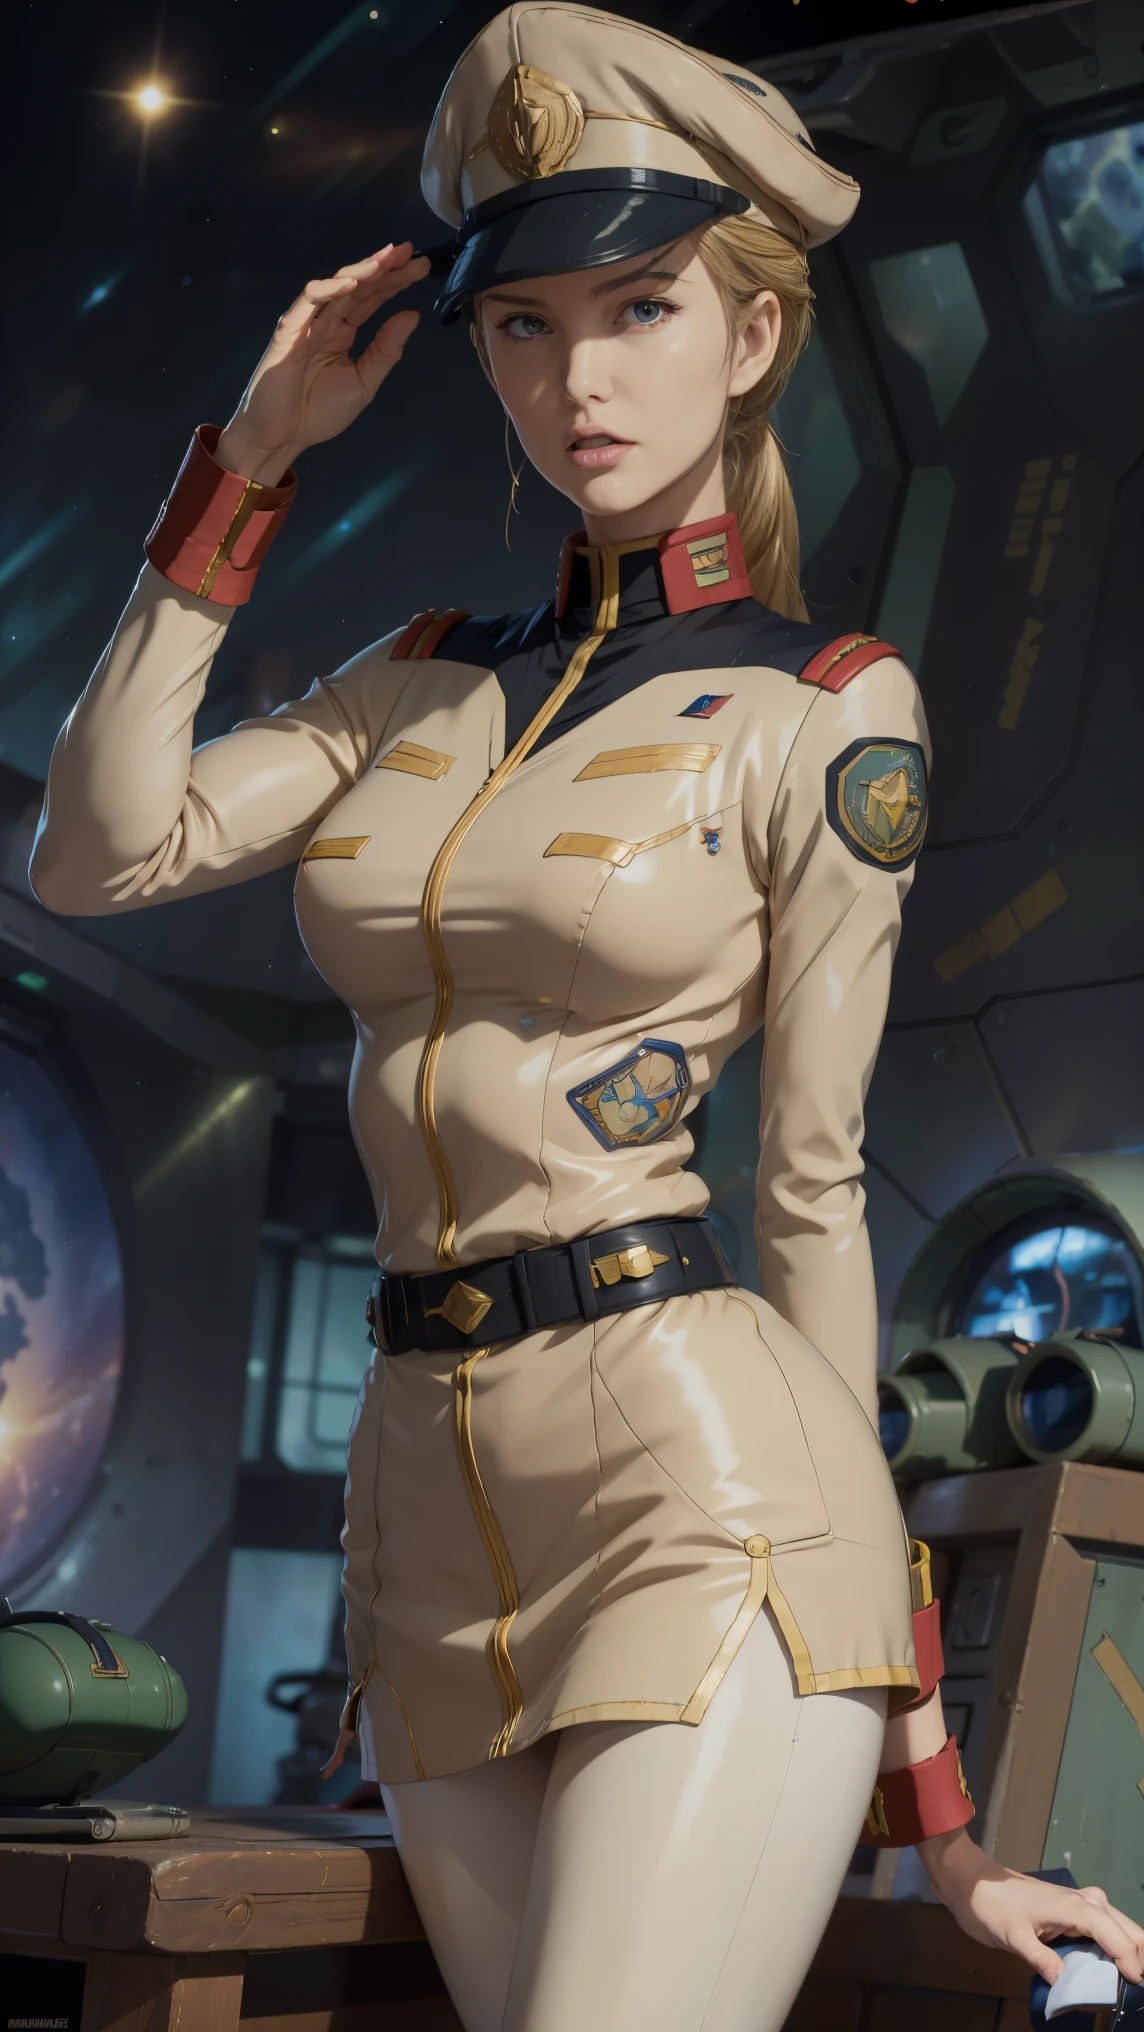 (((masterpiece,highest quality,In 8K,Super detailed,High resolution,anime style,absolutely))),A female officer of the Earth Federation Forces is standing,(alone:1.5),((ten huts:1.5)),(((seriously;1.5))),(((Salute with your right hand;1.5))),(((stretch your left hand straight:1.5))),(Angelina Jolie:1.5),(((The background is a military base 1.5))),((sunset:1.5)),((blur background:1.5))),break (Wearing the uniform of the Earth Federation Forces:1.5),(wearing federal employee&#39;hat of:1.5),(Beautiful woman:1.5),(Detailed facial depiction:1.5),(wallpaper:1.5),(whole body:1.5),((overlook:1.5))